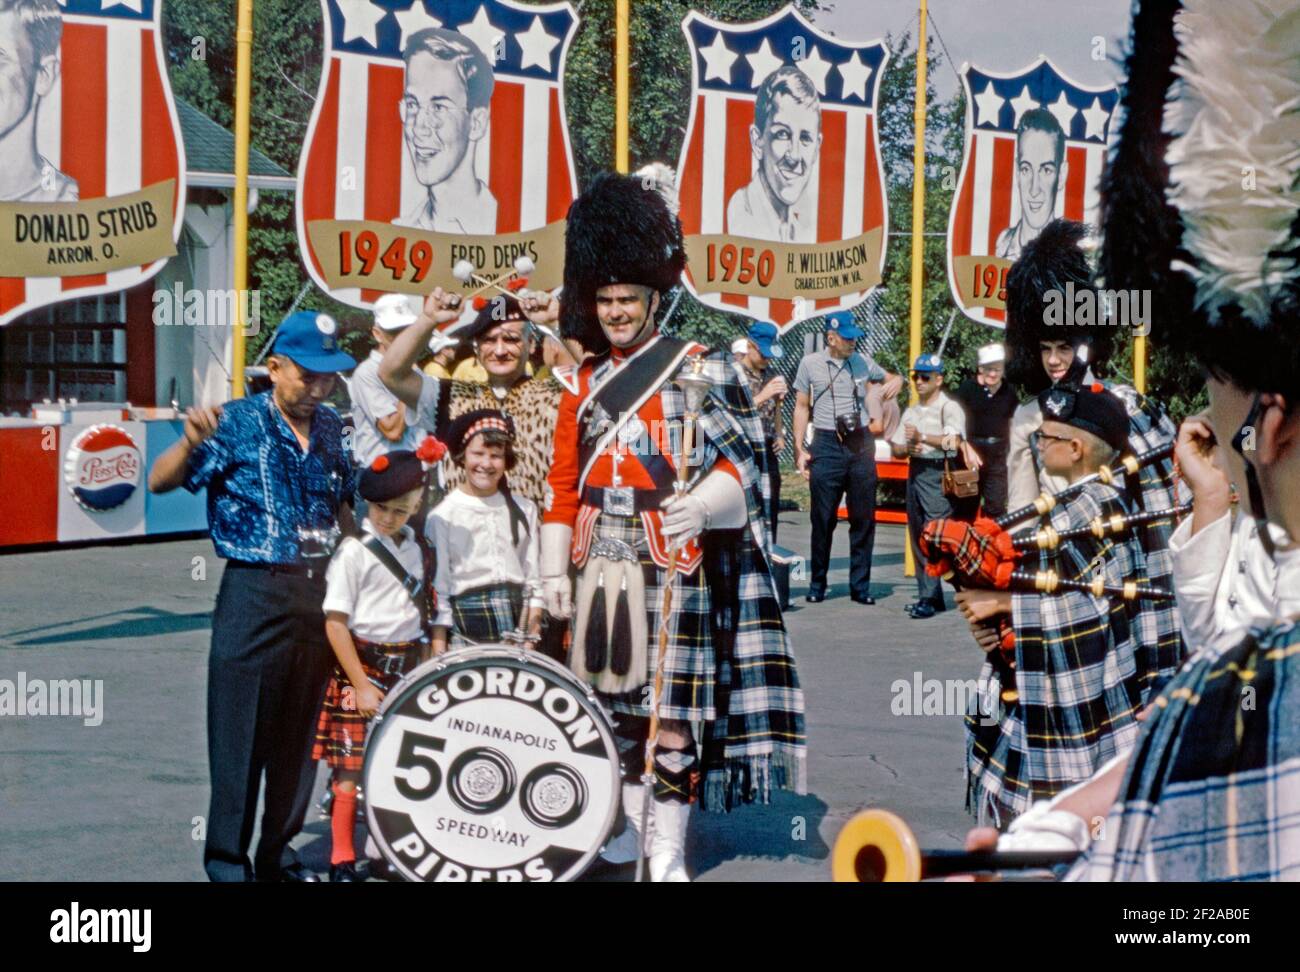 A Scottish pipe band at racetrack at Derby Downs, Akron, Ohio, USA in 1965. The venue has been the home track of the ‘All American Soap Box Derby’ since it was built as a Works Progress Administration (WPA) project in the 1930s. The band members are from the Gordon Pipers from the Indianapolis 500 Speedway. Traditions abound with famous previous winners of races shown on banners, including Fred Derks (1949) and Harold ‘Butch’ Williamson (1950). This image is from an old American amateur Kodak colour transparency – a vintage 1960s photograph. Stock Photo